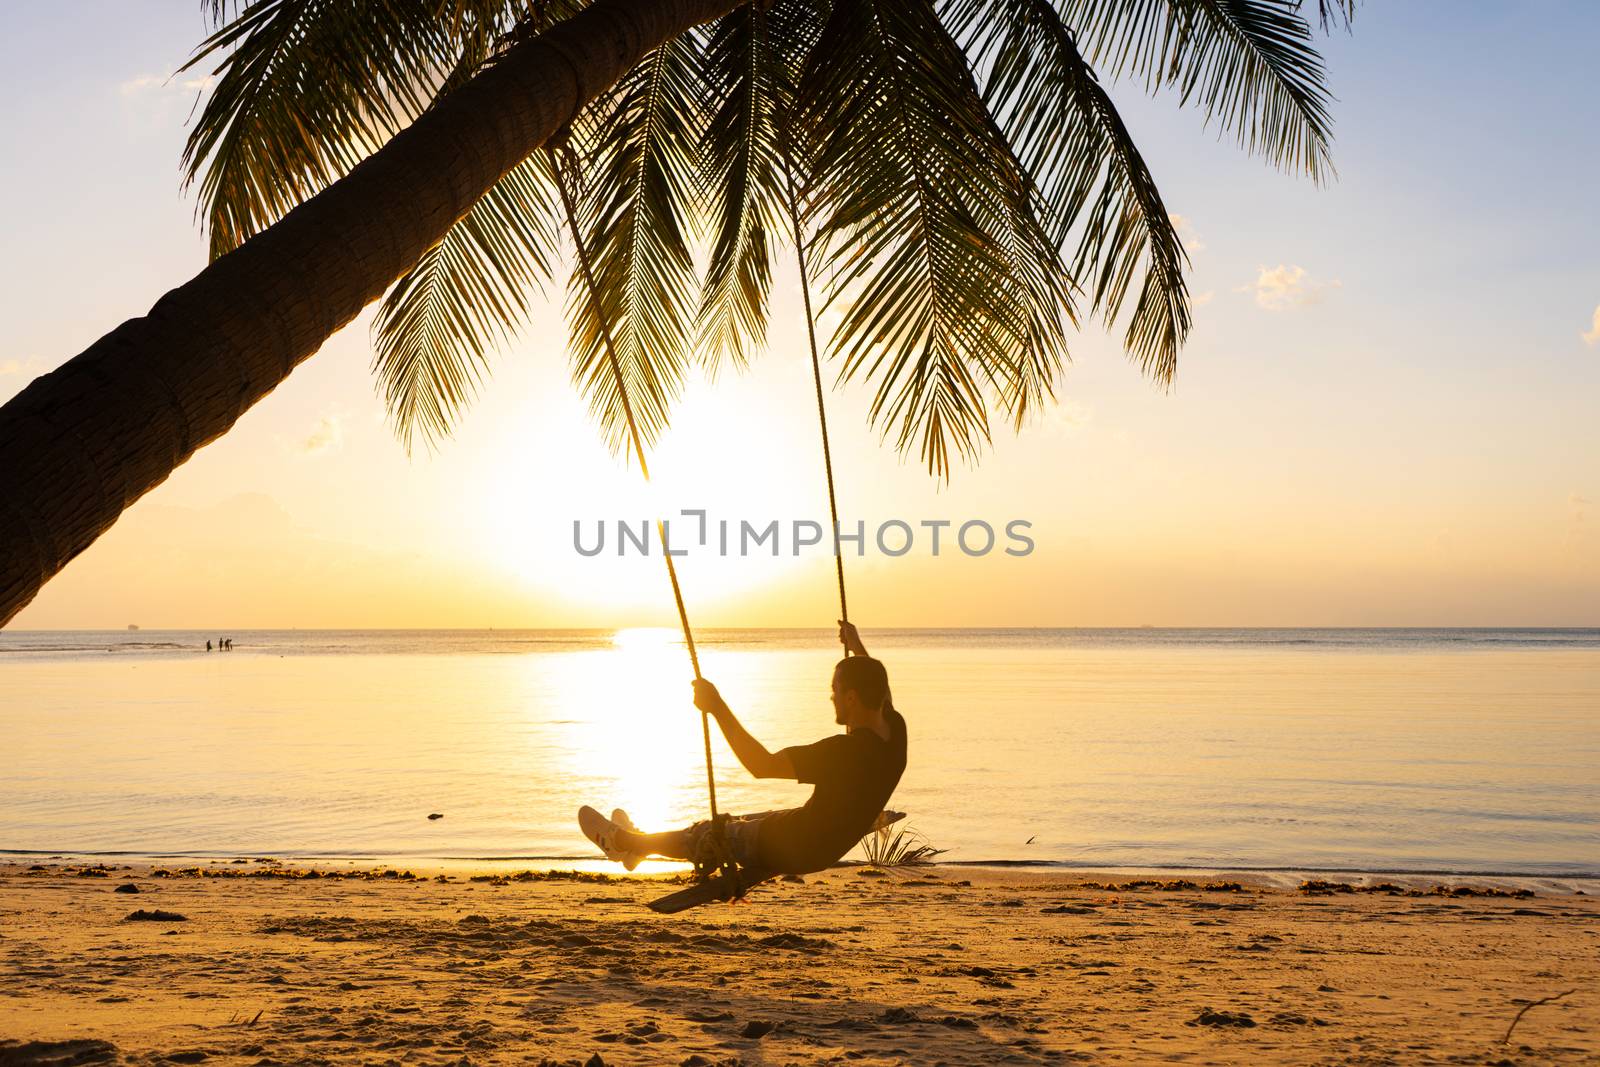 The guy enjoys the sunset riding on a swing on the ptropical beach. Silhouettes of a guy on a swing hanging on a palm tree, watching the sunset in the water. by Try_my_best